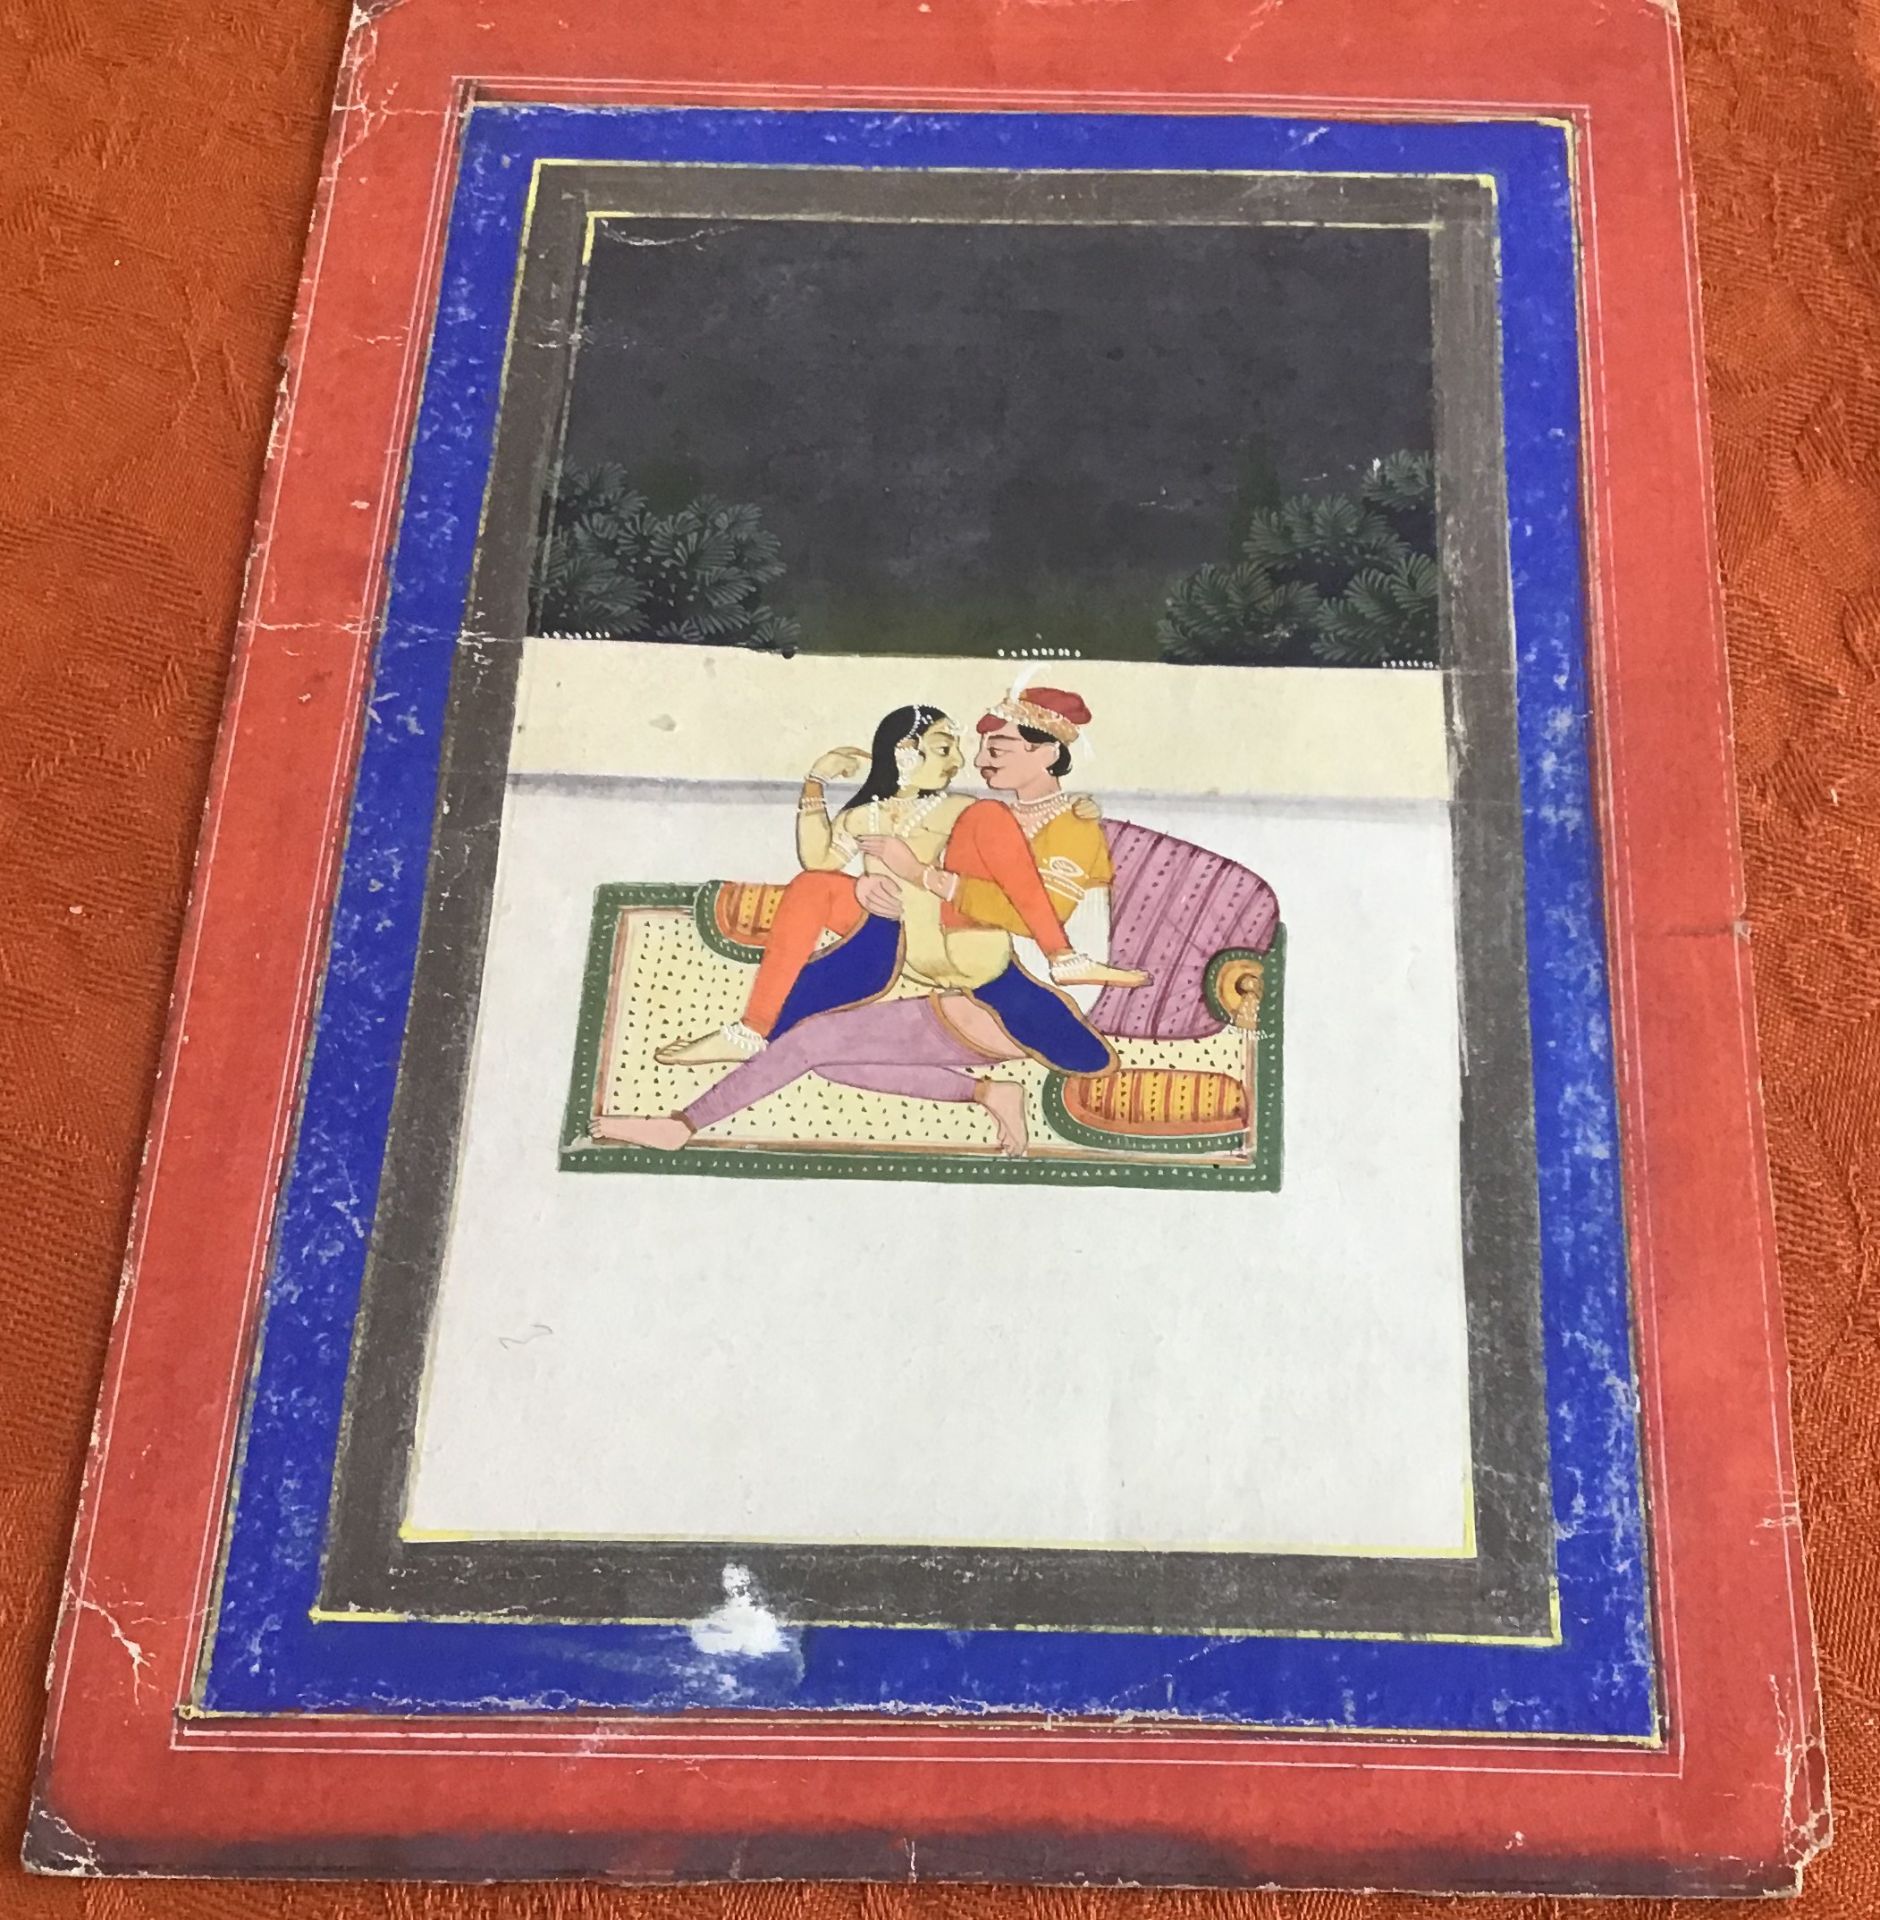 EIGHT EROTIC PAINTINGS. East India. Rajasthan, prob. Jaipur. Late 19th/beg. 20th c. Pigments and - Image 9 of 11